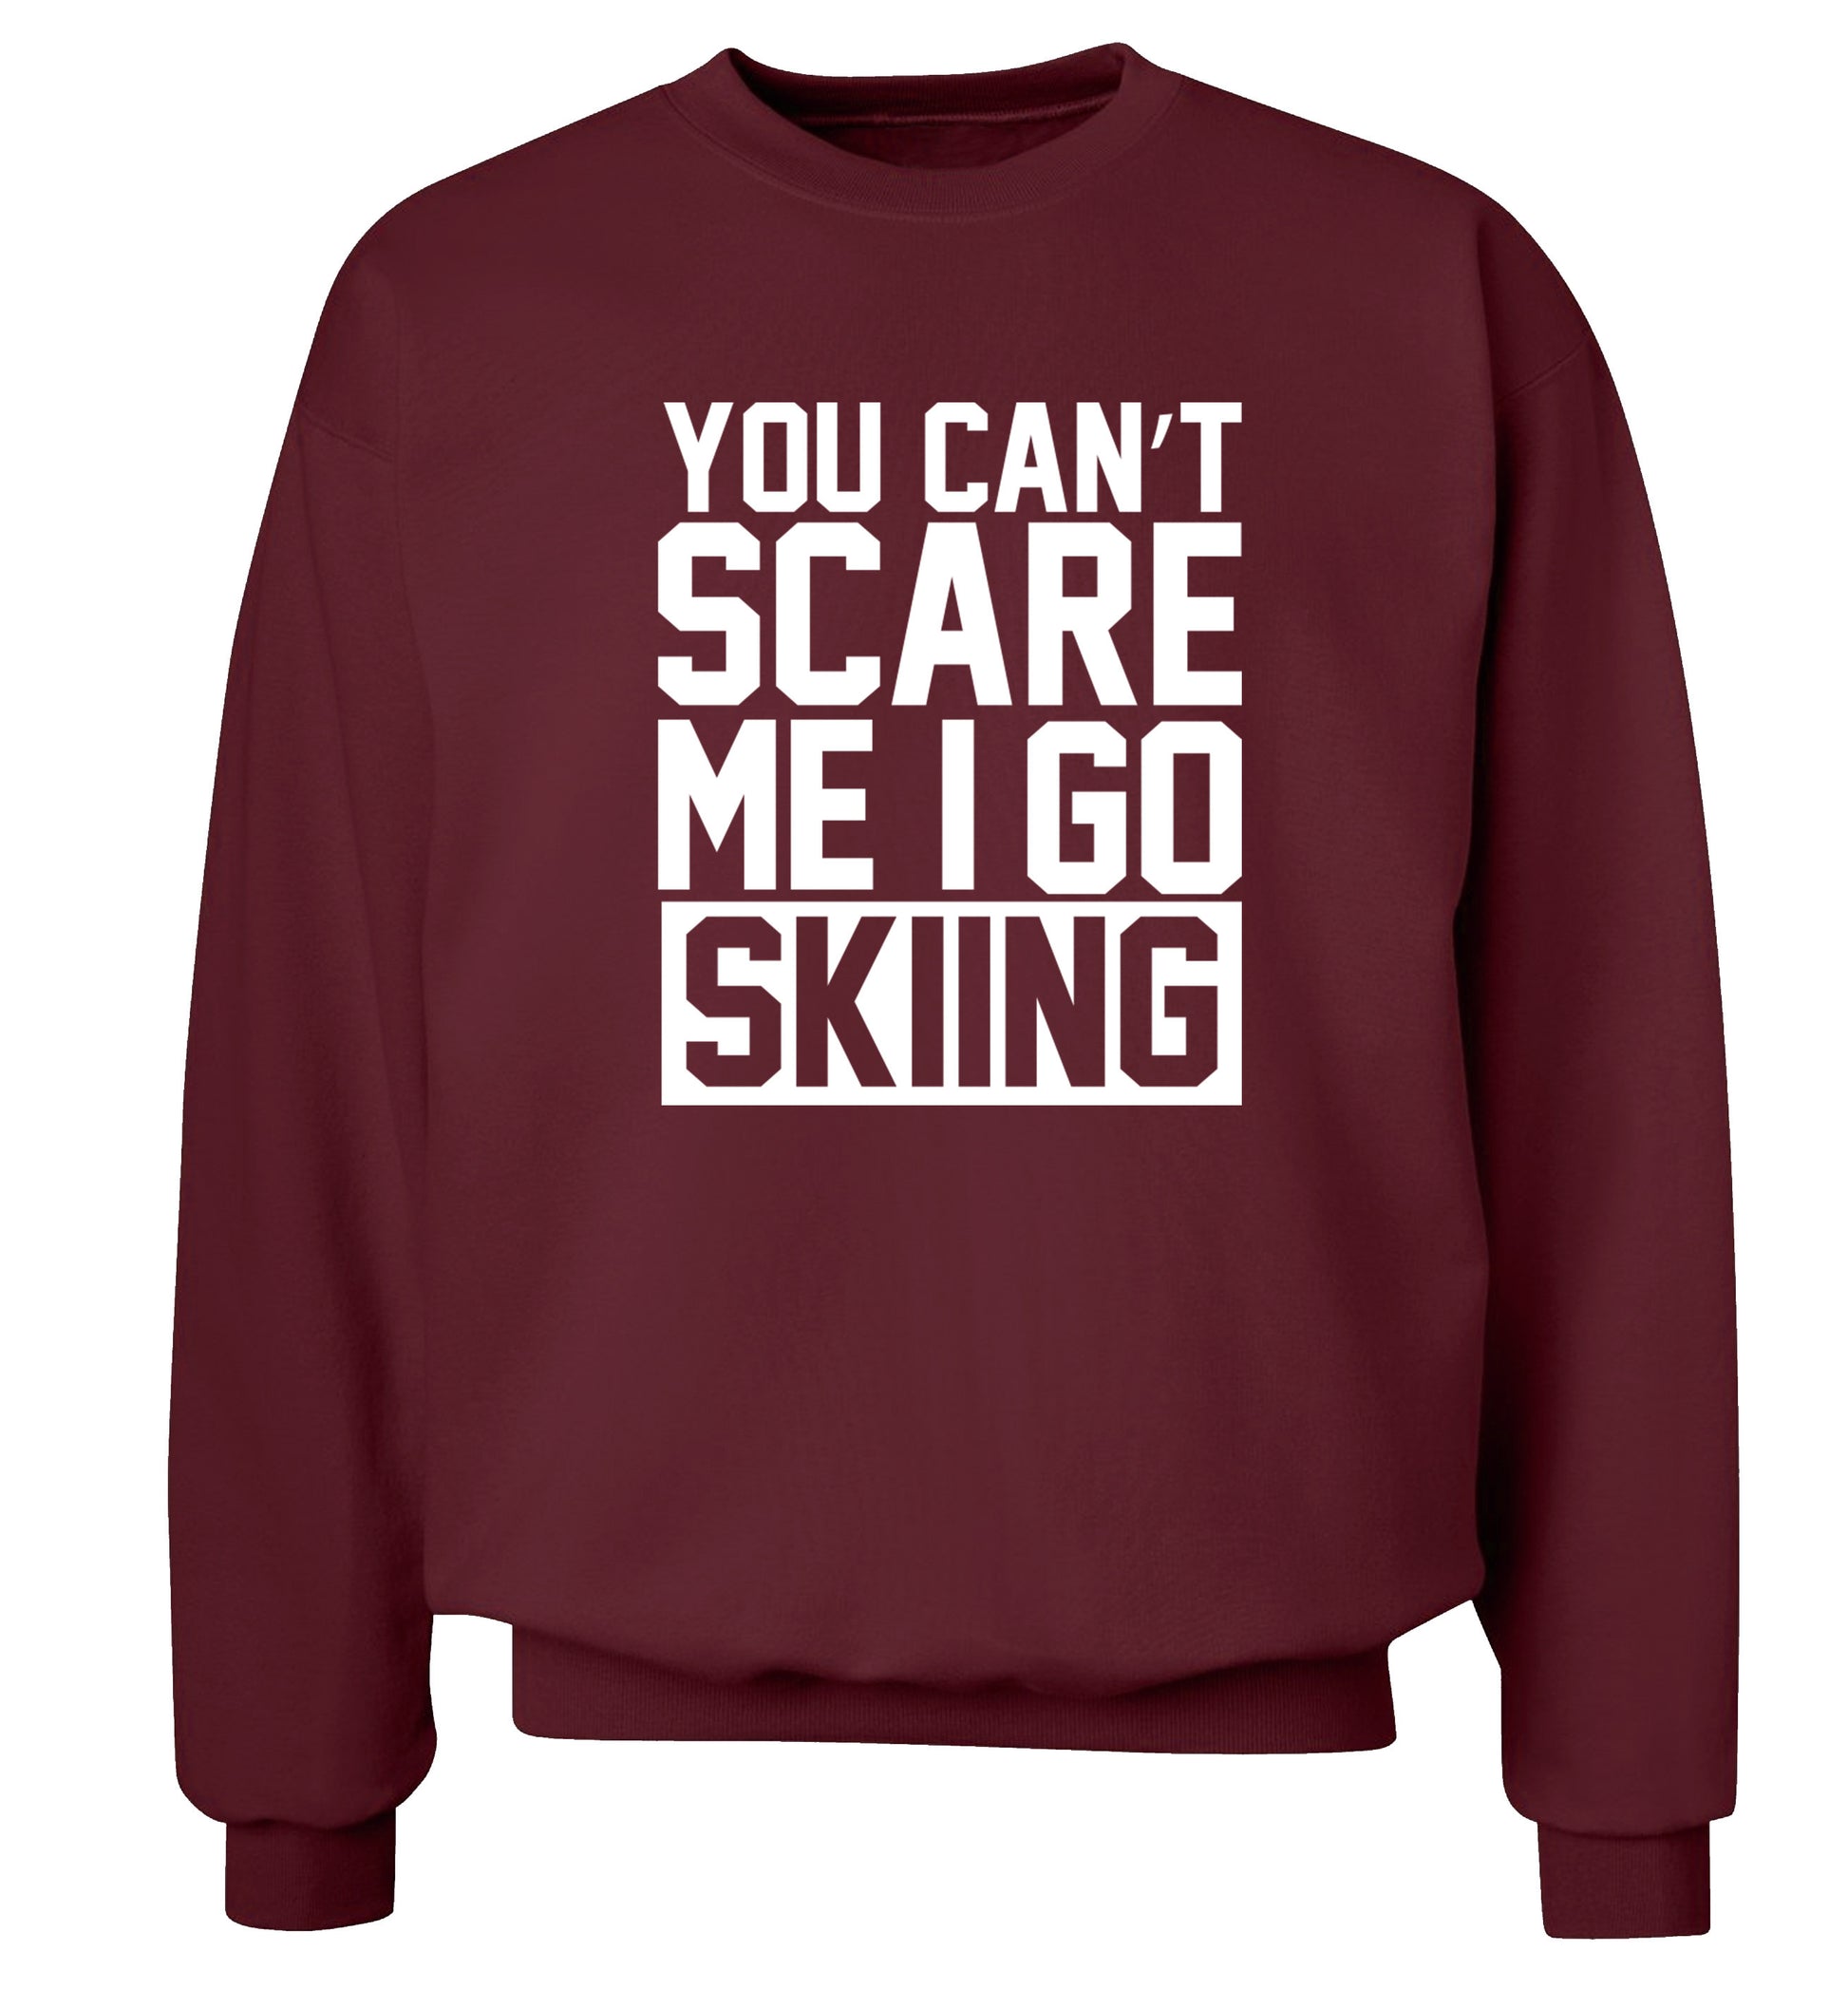 You can't scare me I go skiing Adult's unisex maroon Sweater 2XL